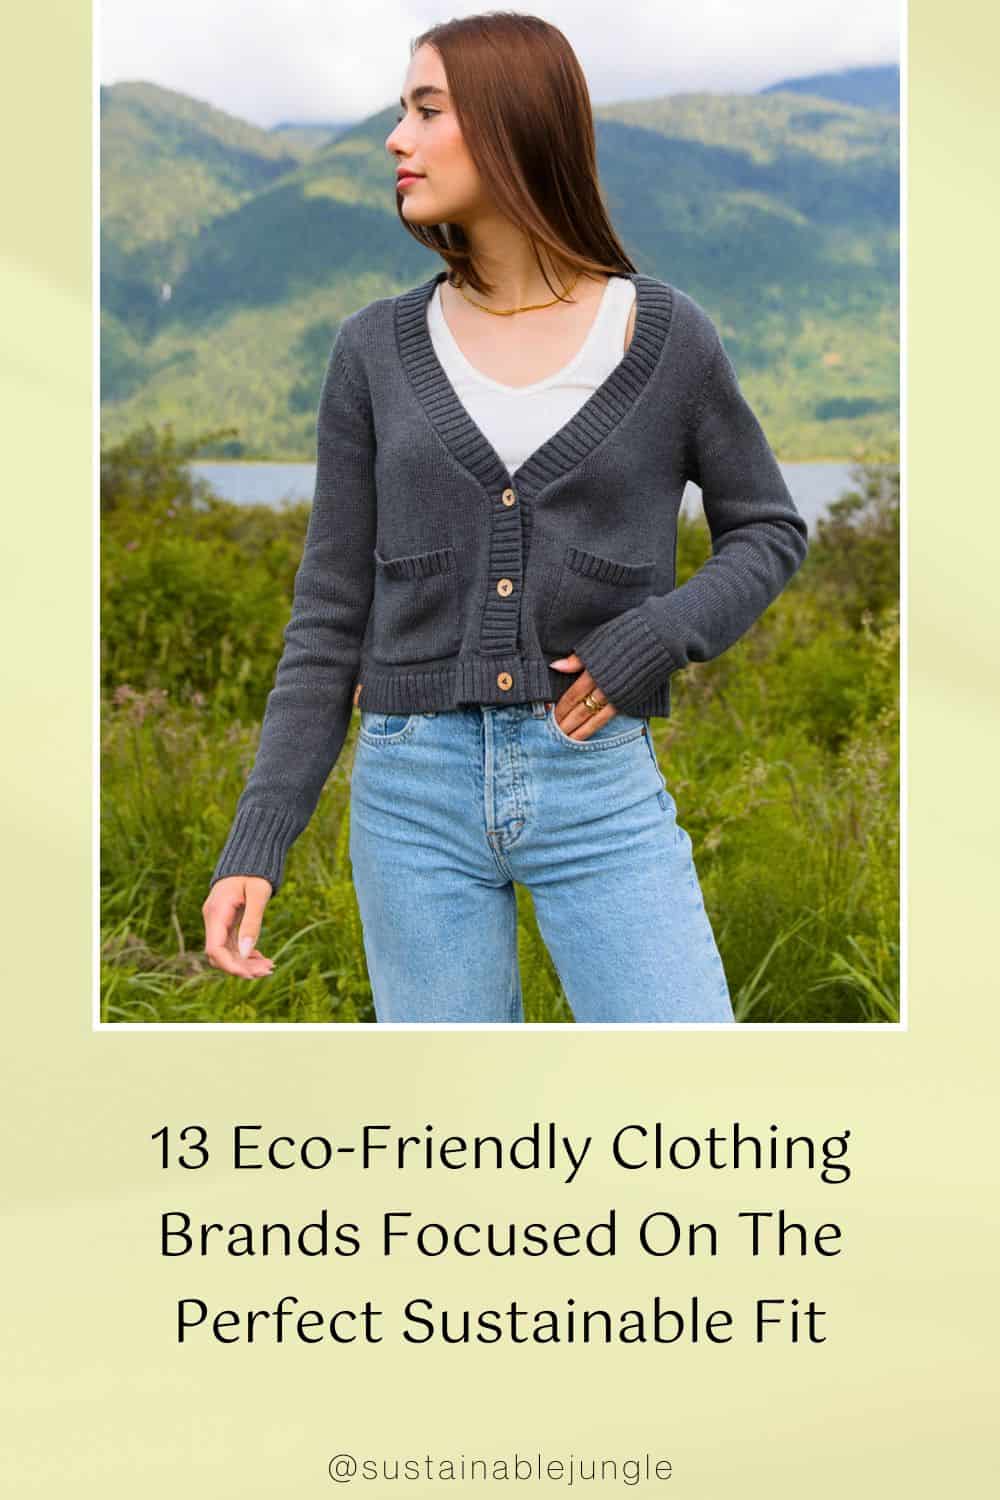 13 Eco-Friendly Clothing Brands Focused On The Perfect Sustainable Fit Image by tentree #ecofriendlyclothingbrands #bestecofriendlyclothingbrands #ecofriendlyclothingbrandsUSA #sustainableclothingbrands #affordablesustainableclothingbrands #sustainablebrandsclothing #sustainablejungle